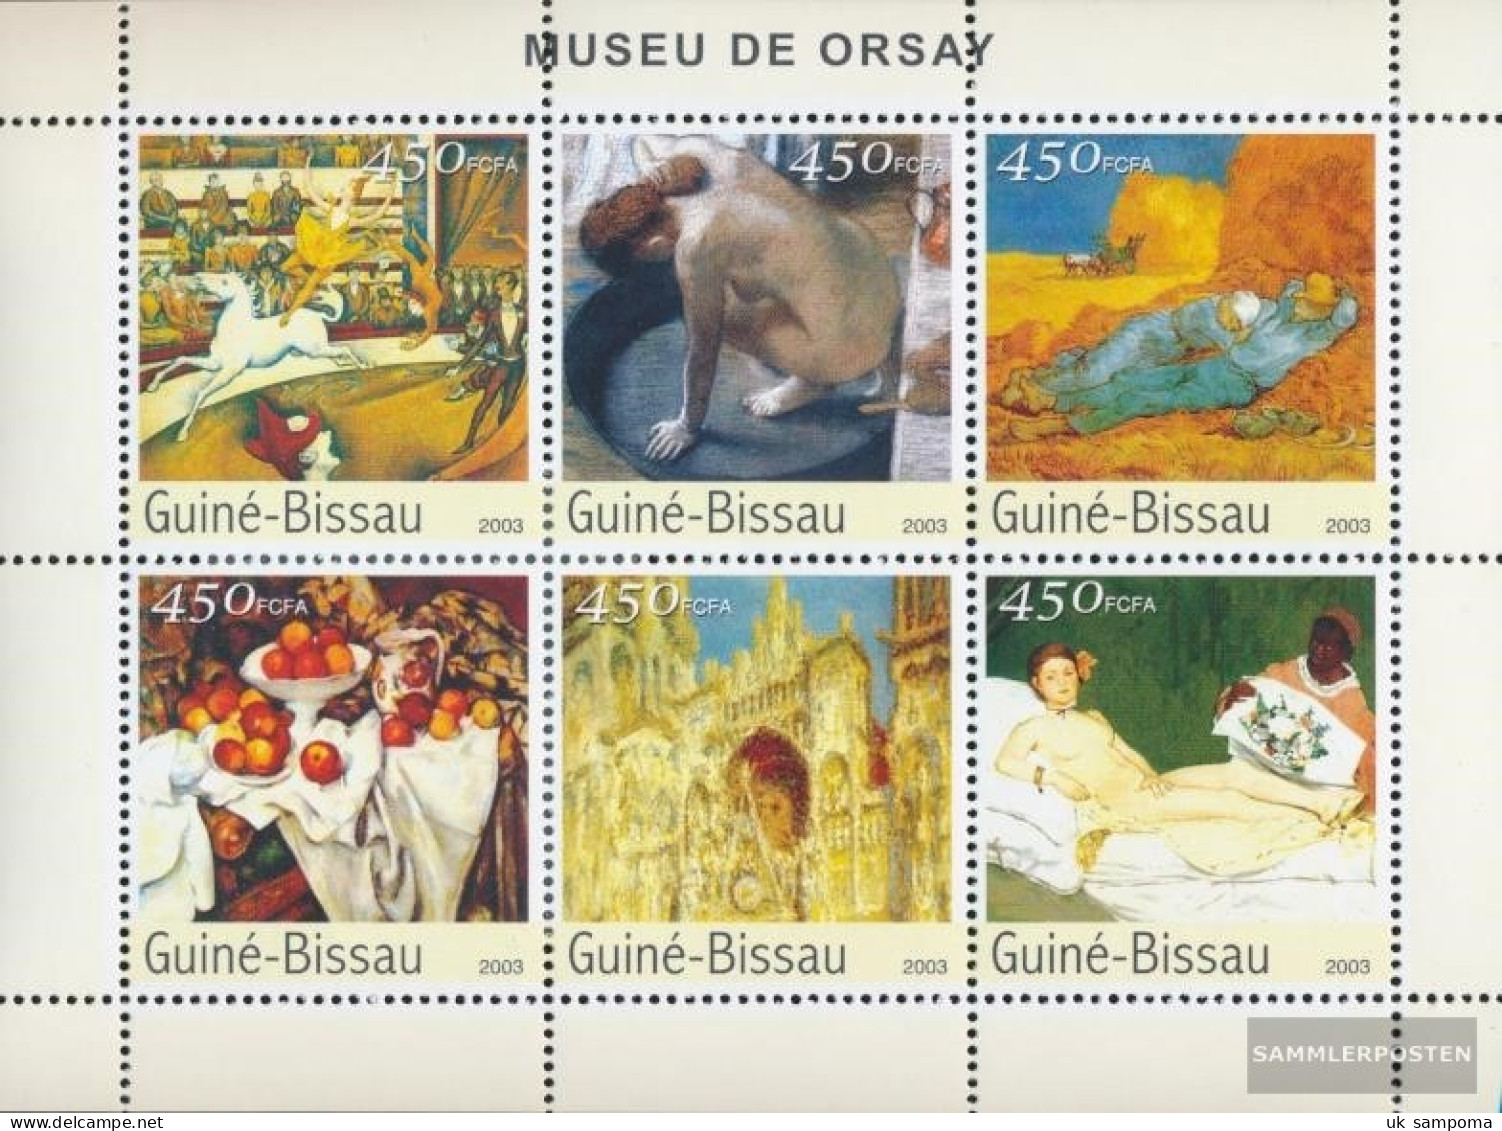 Guinea-Bissau 2664-2669 Sheetlet (complete. Issue) Unmounted Mint / Never Hinged 2003 Paintings (Museum Of Orsay) - Guinea-Bissau